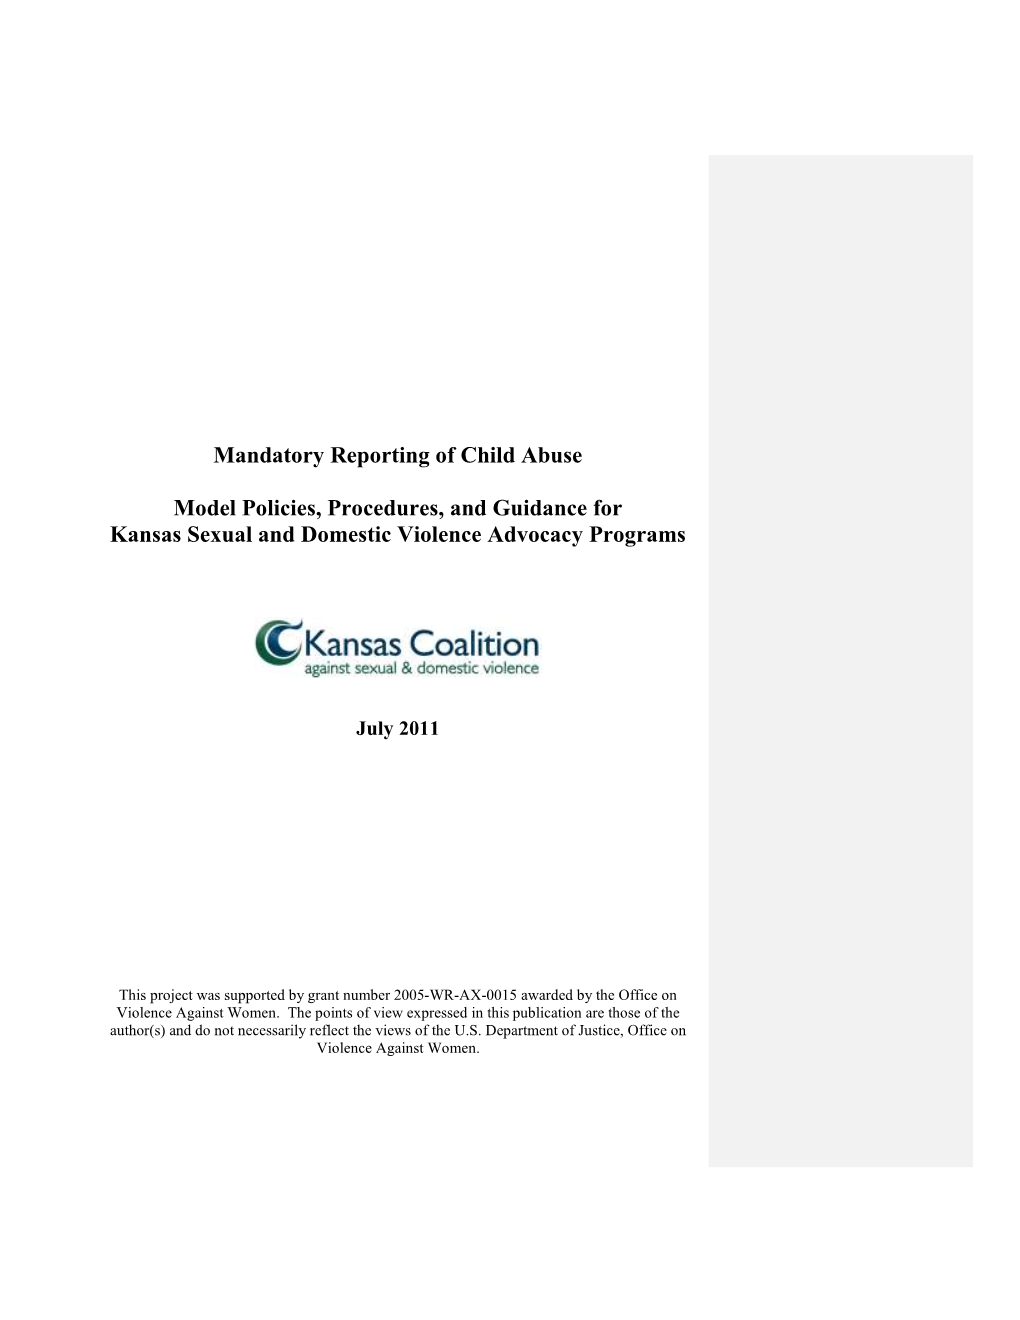 Kansas Mandatory Reporting of Child Abuse: Model Policies, Procedures, and Guidance for Advocacy Programs